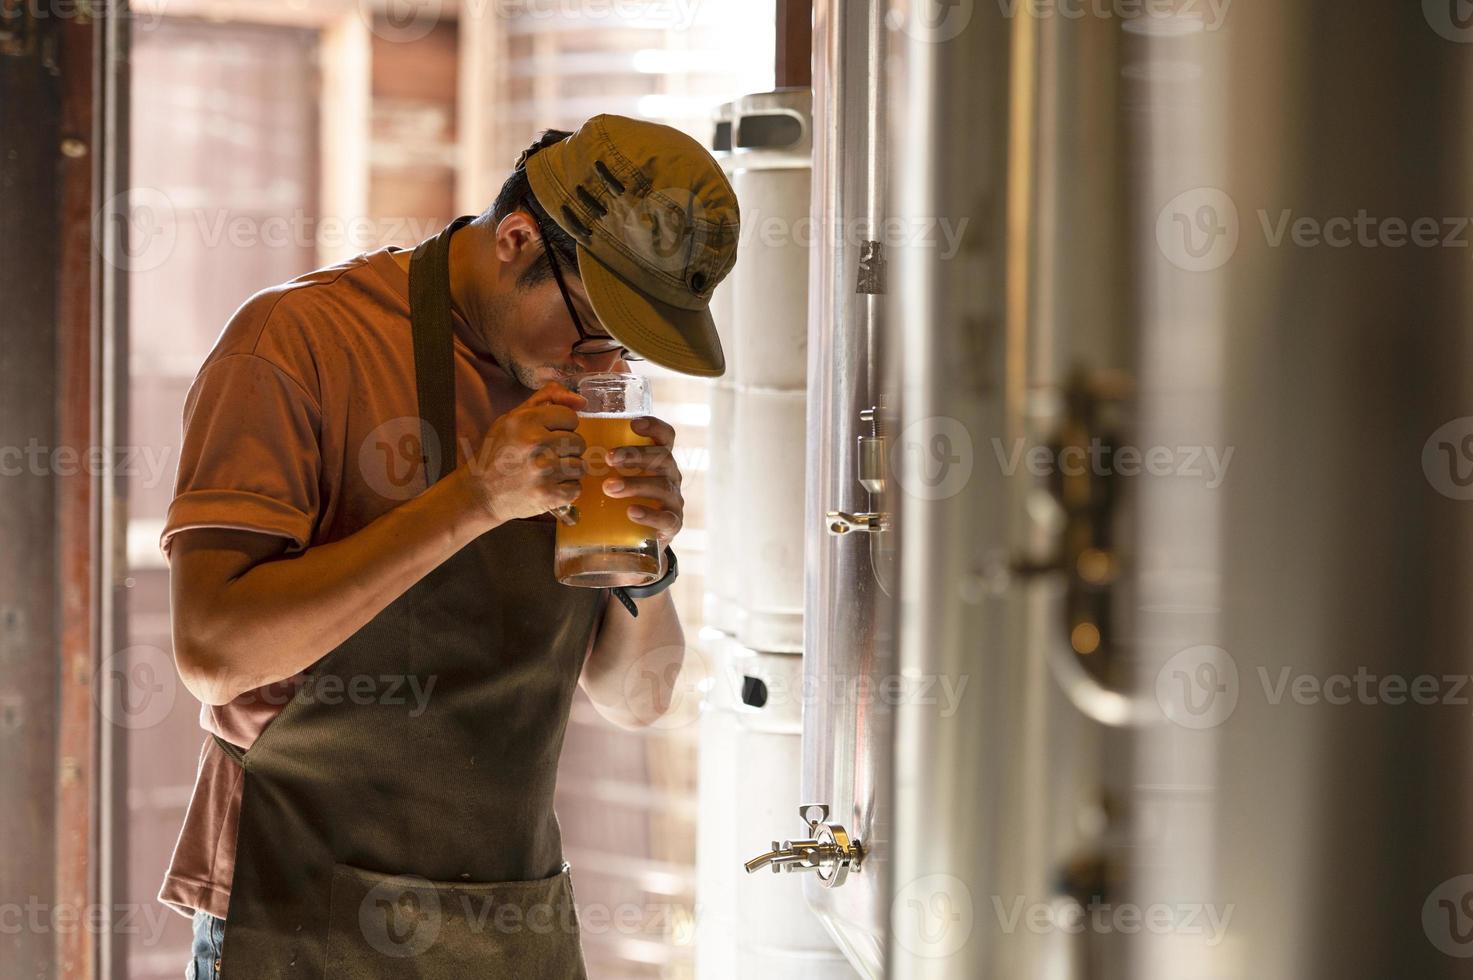 A young man works in a brewery and checks the quality of craft beer. The brewery owner tastes the best beers from Bach. A man's shortcut fills a glass of beer with photo